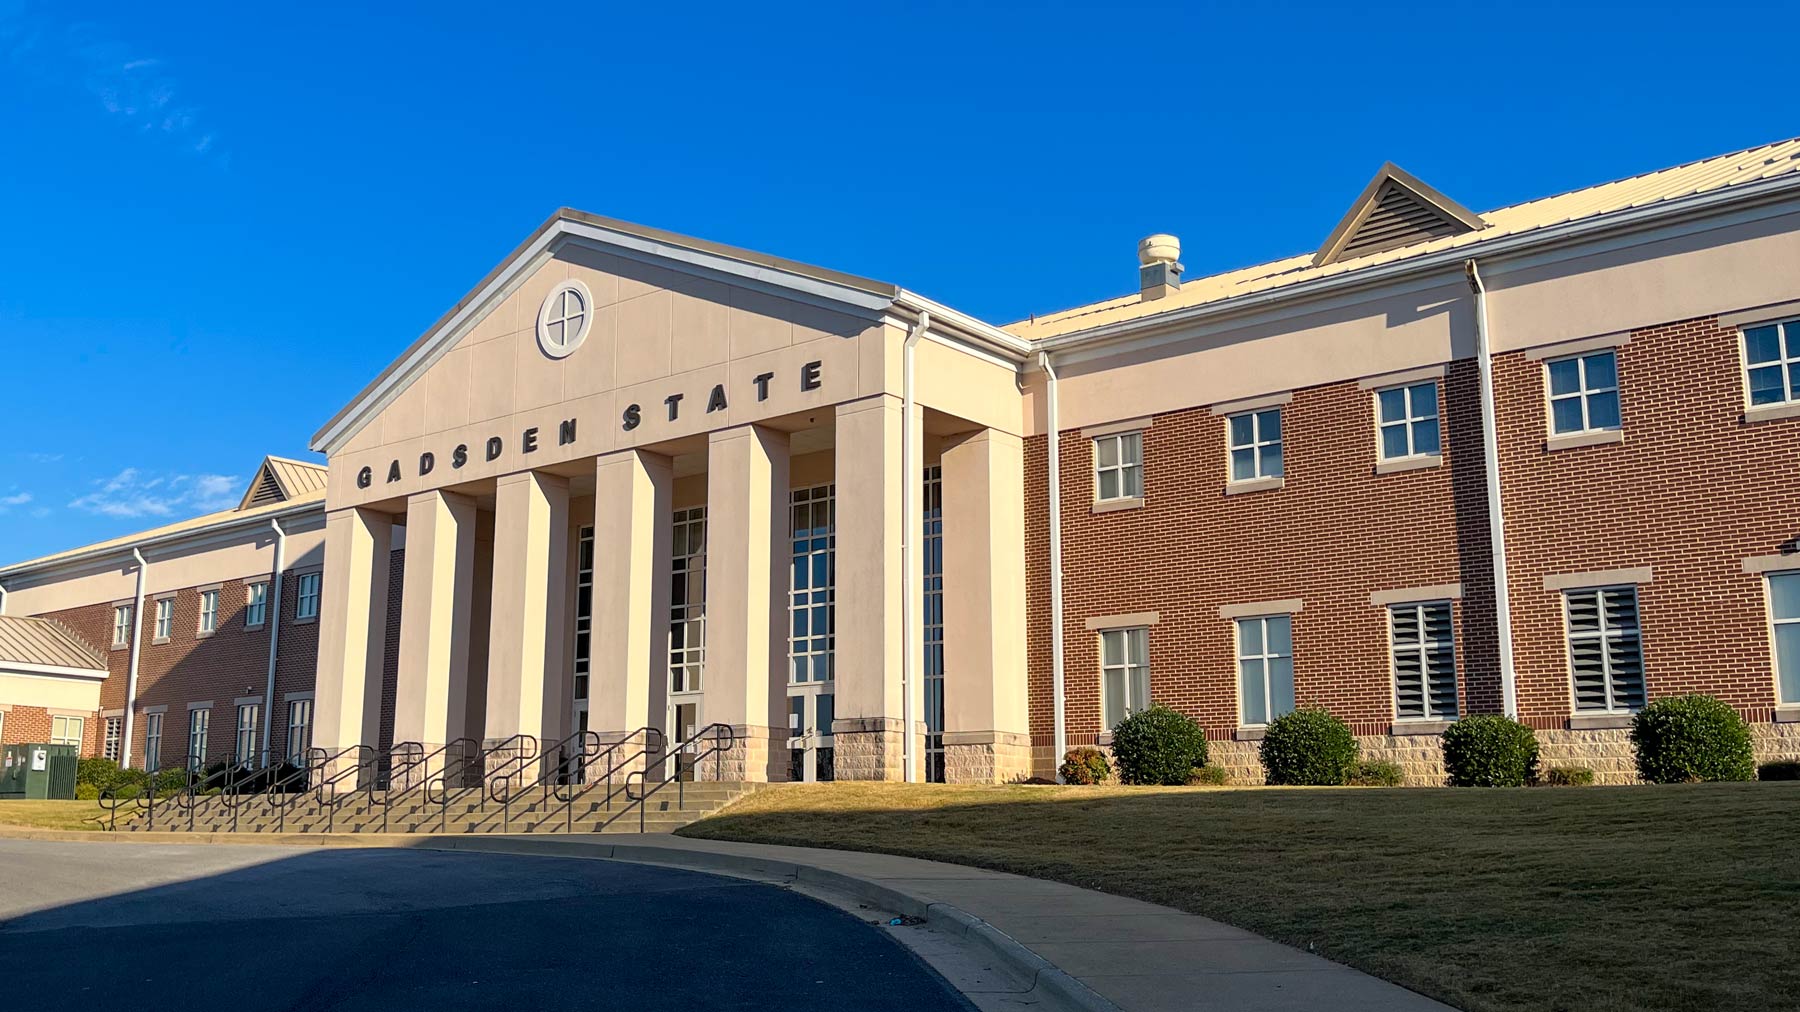 Photo of the Gadsden State Cherokee campus